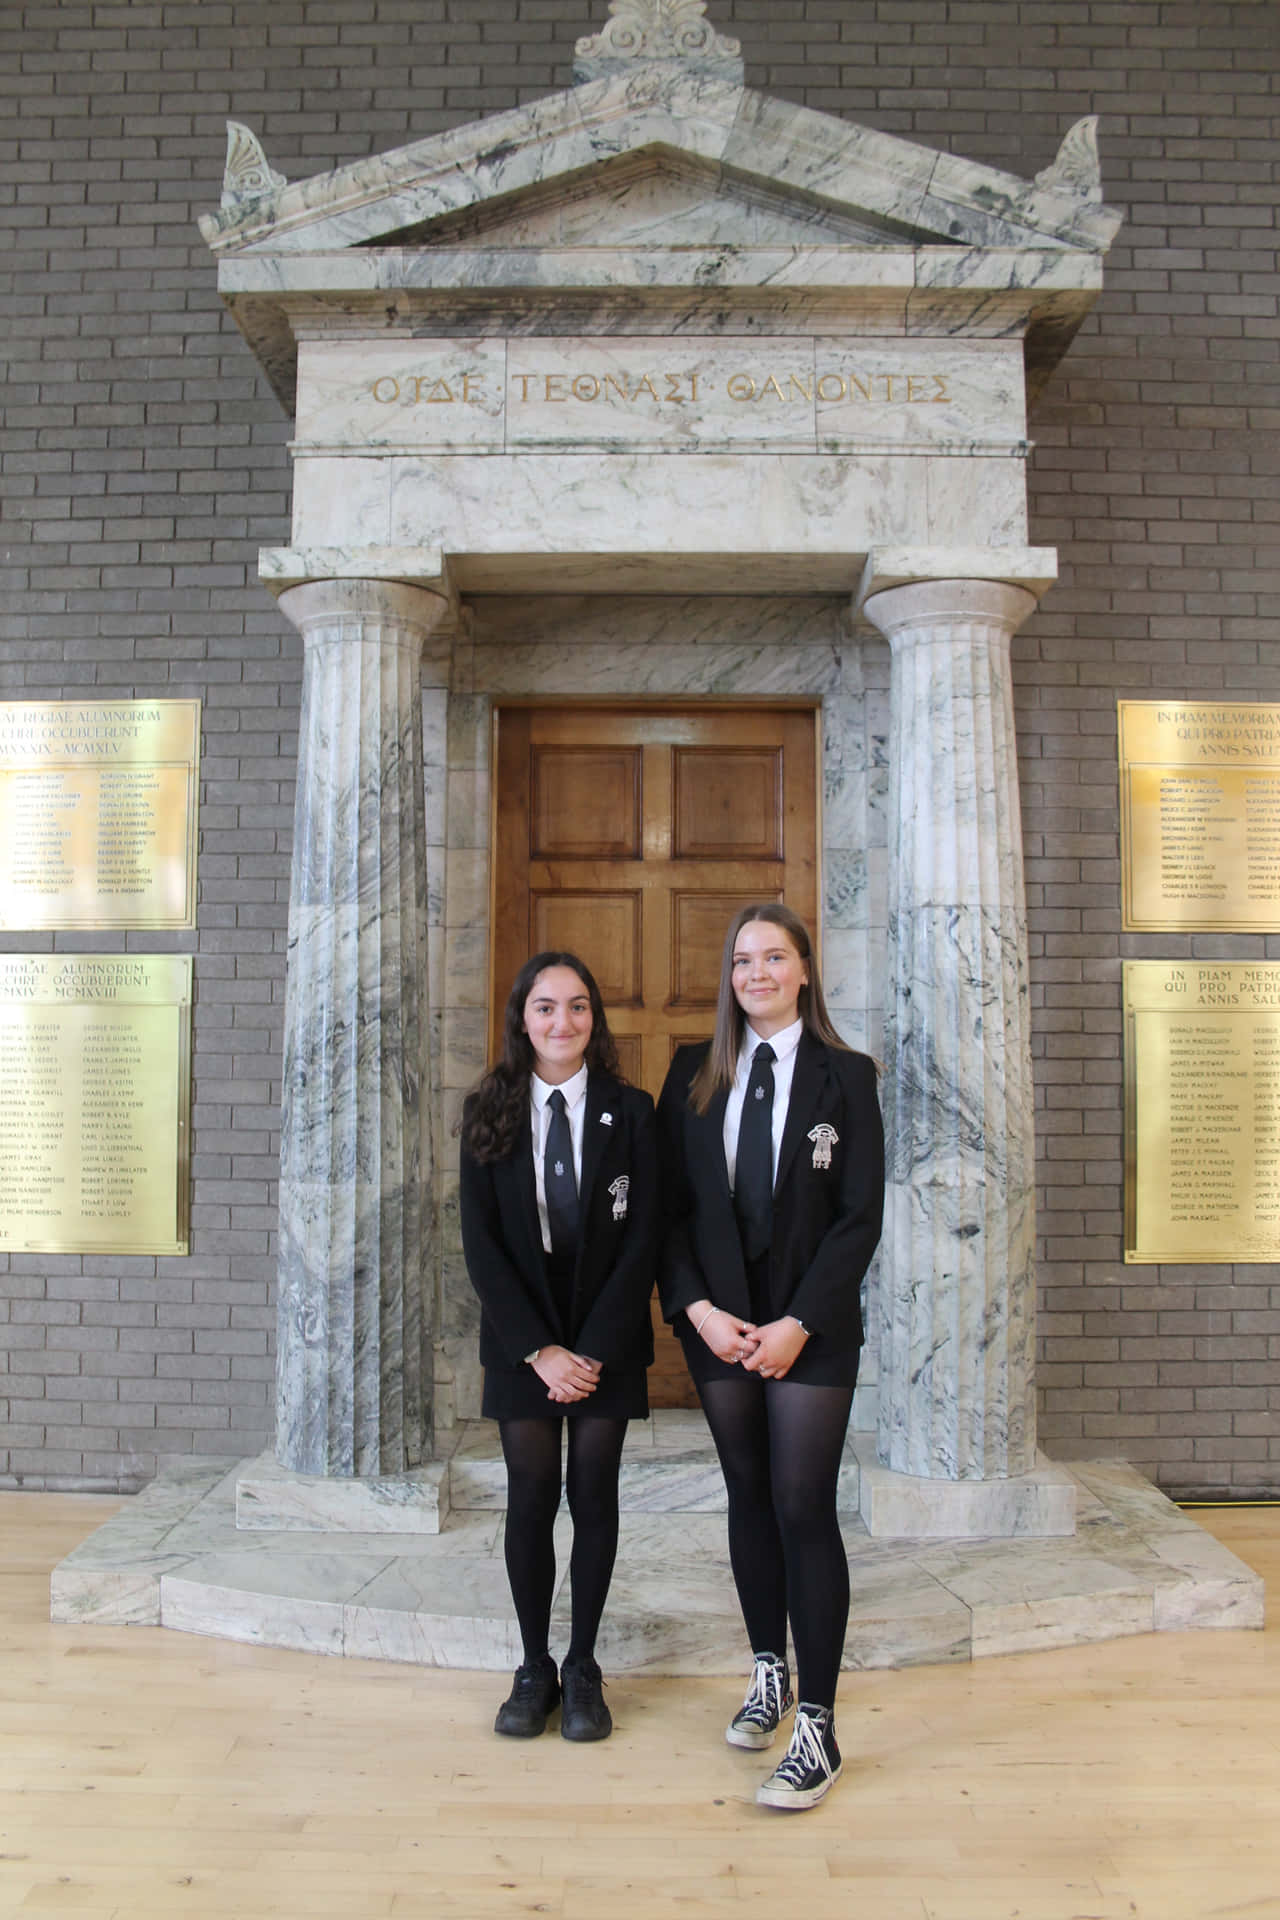 Two Girls Standing In Front Of A Building With A Statue